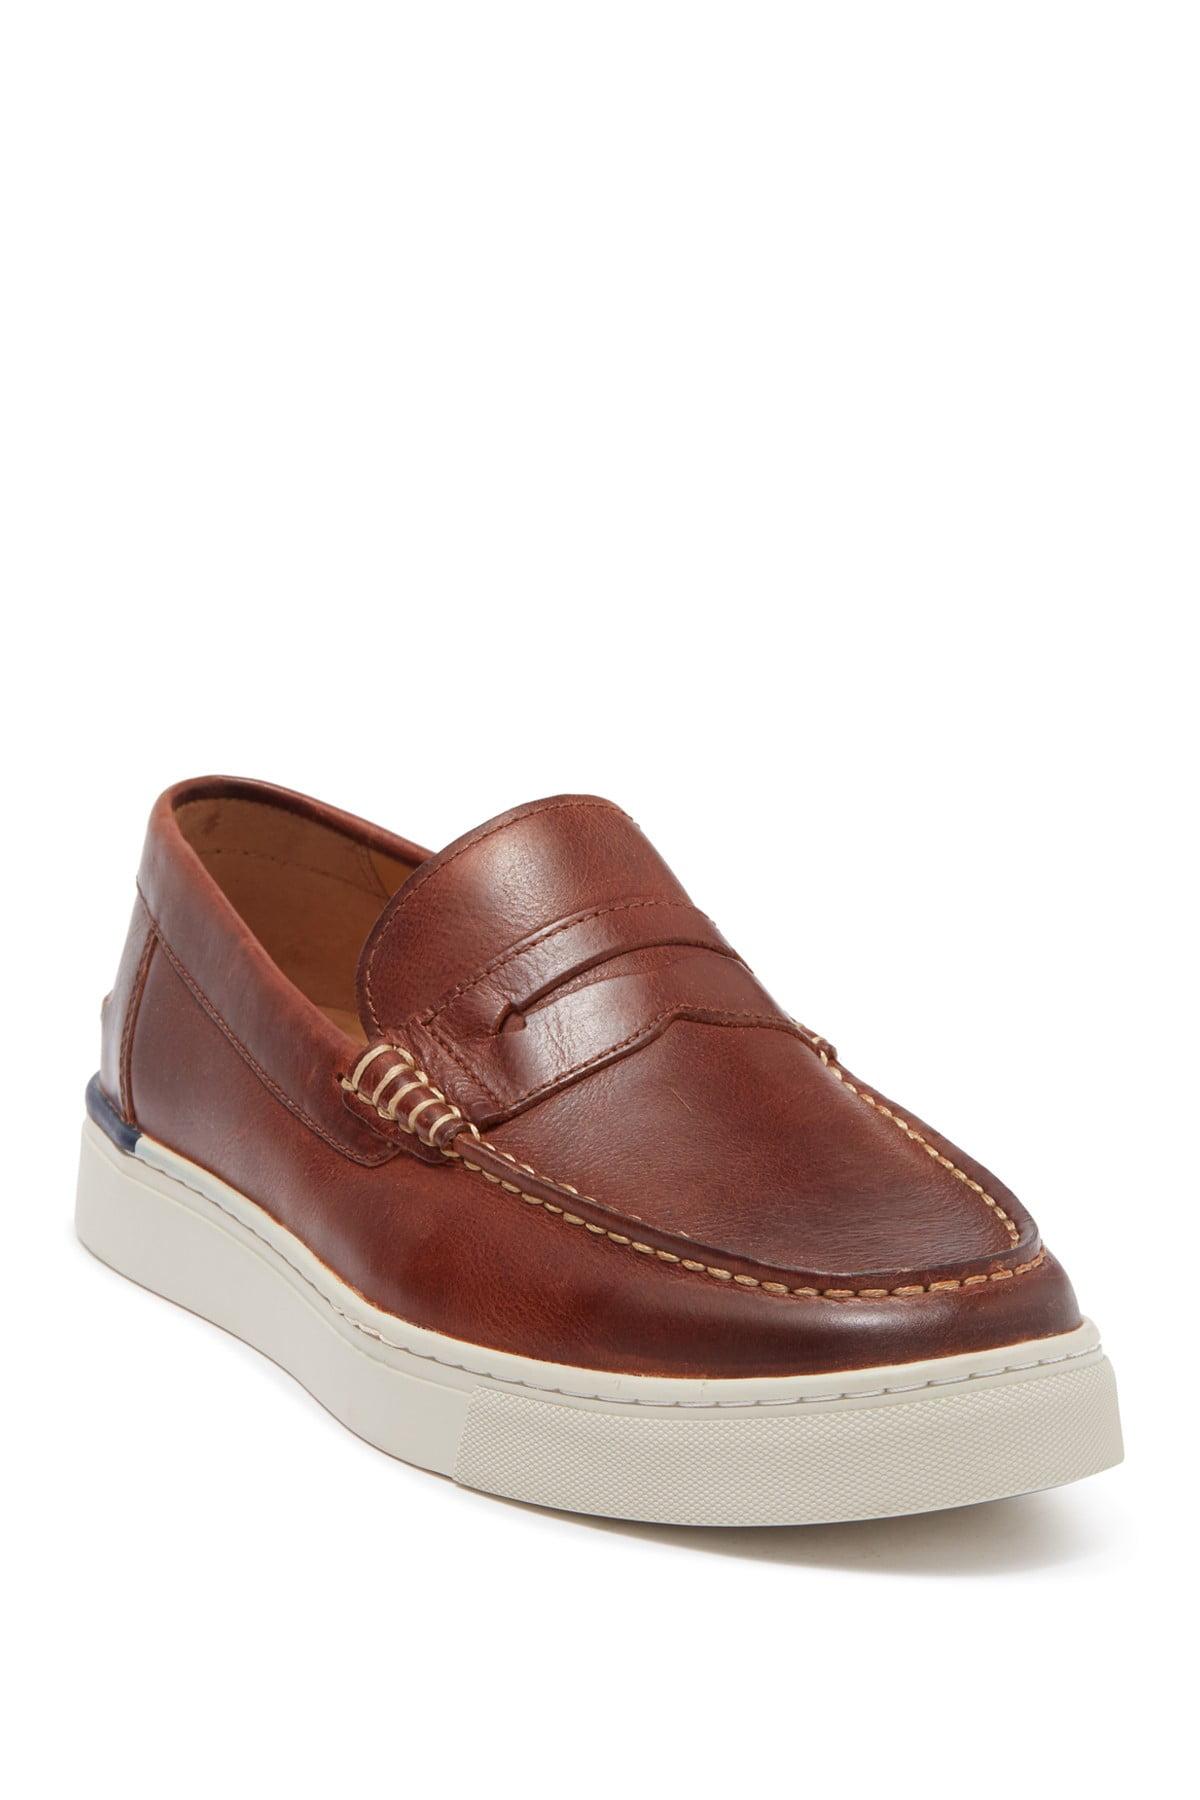 Sperry Top-Sider Gold Cup Victura Penny Loafer for Men | Lyst